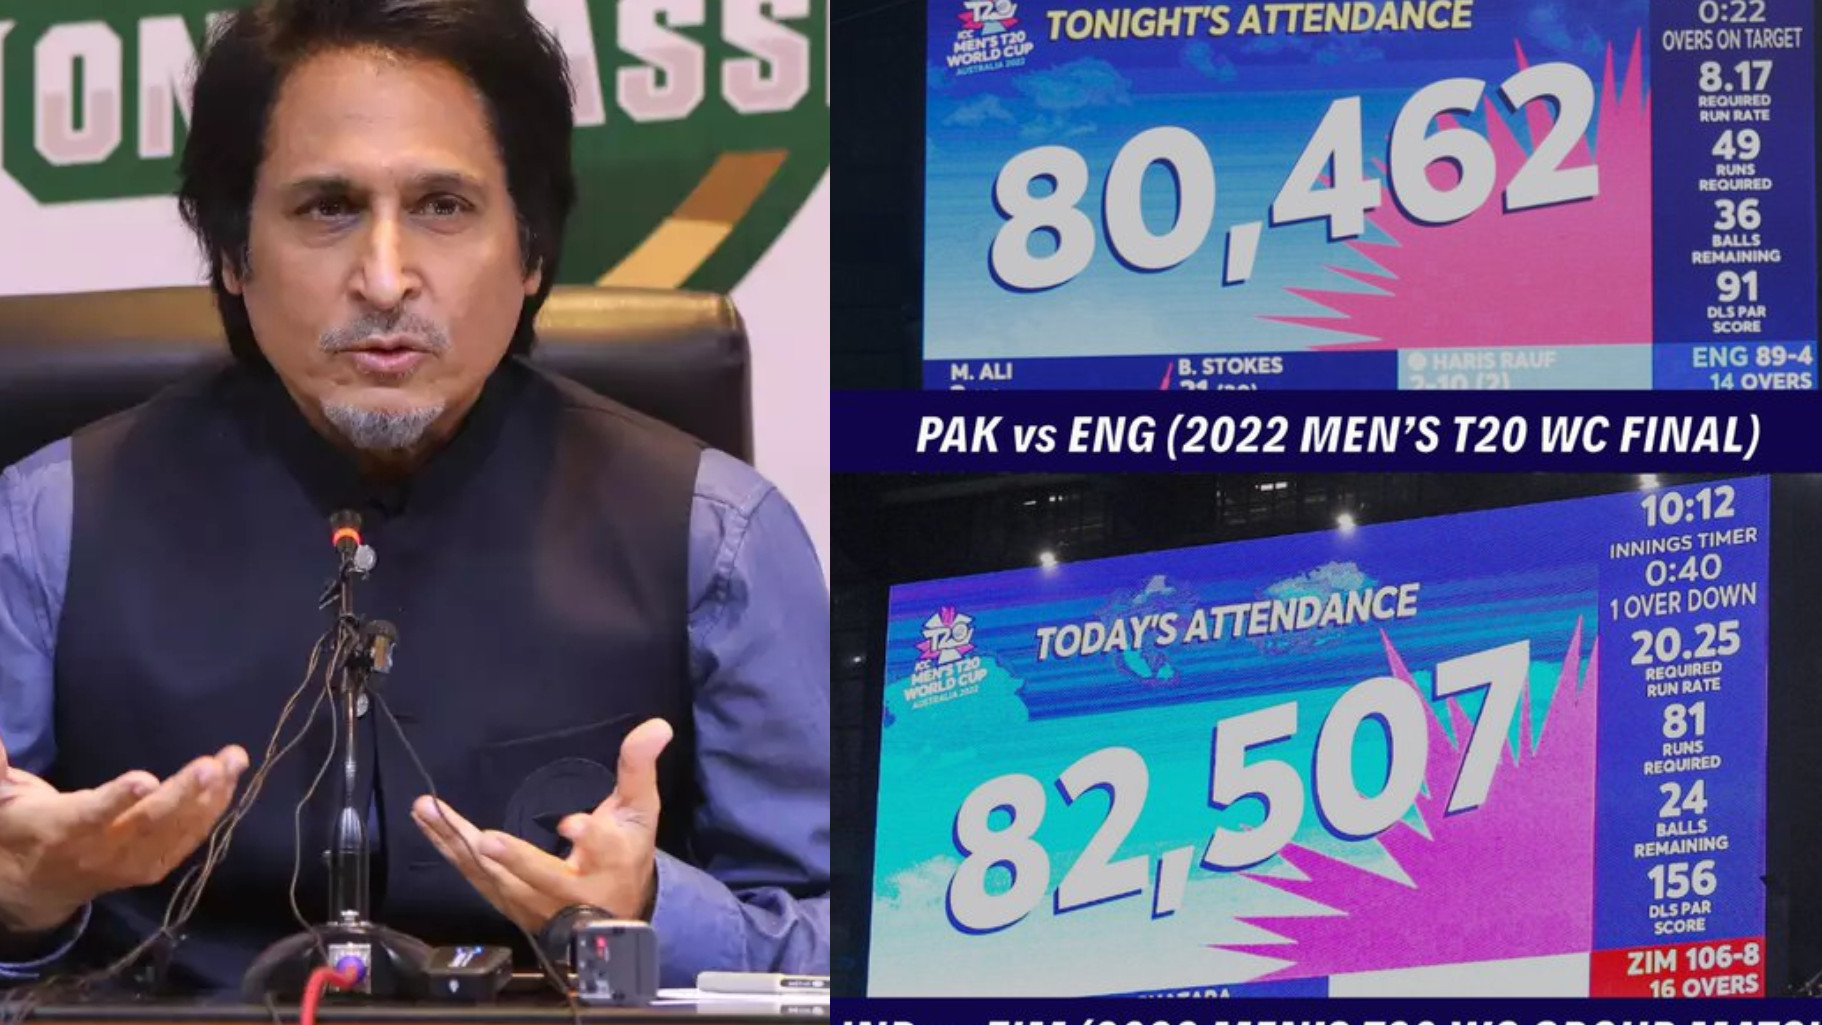 Fans give Ramiz Raja scathing reactions after his 'Who'll watch WC in India if Pakistan don't take part?' remark